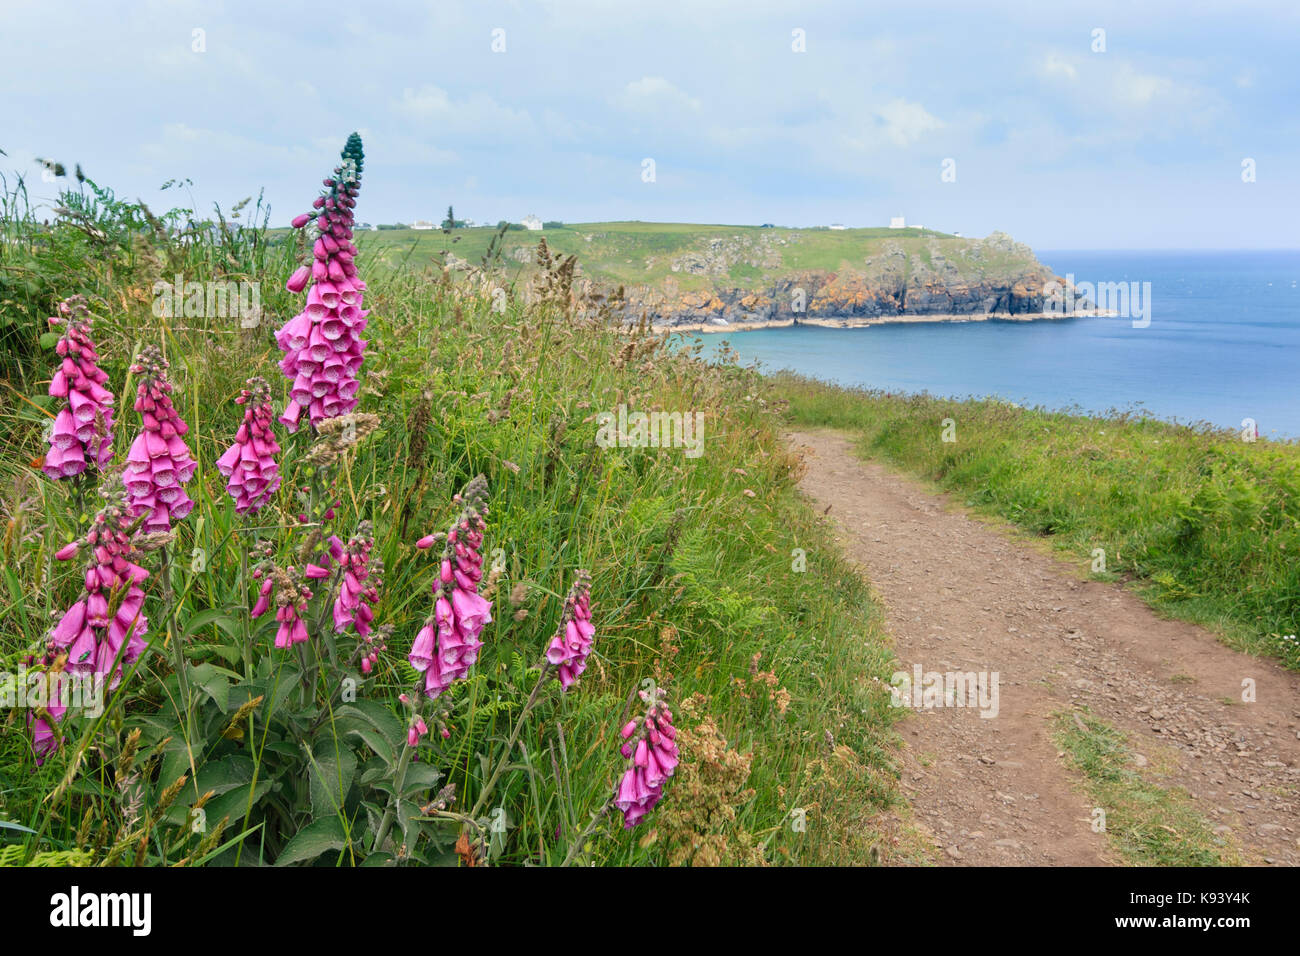 Foxgloves, Digitalis purpurea, on the South West coastal path at The Lizard, Cornwall. Housel Bay in the background. Stock Photo